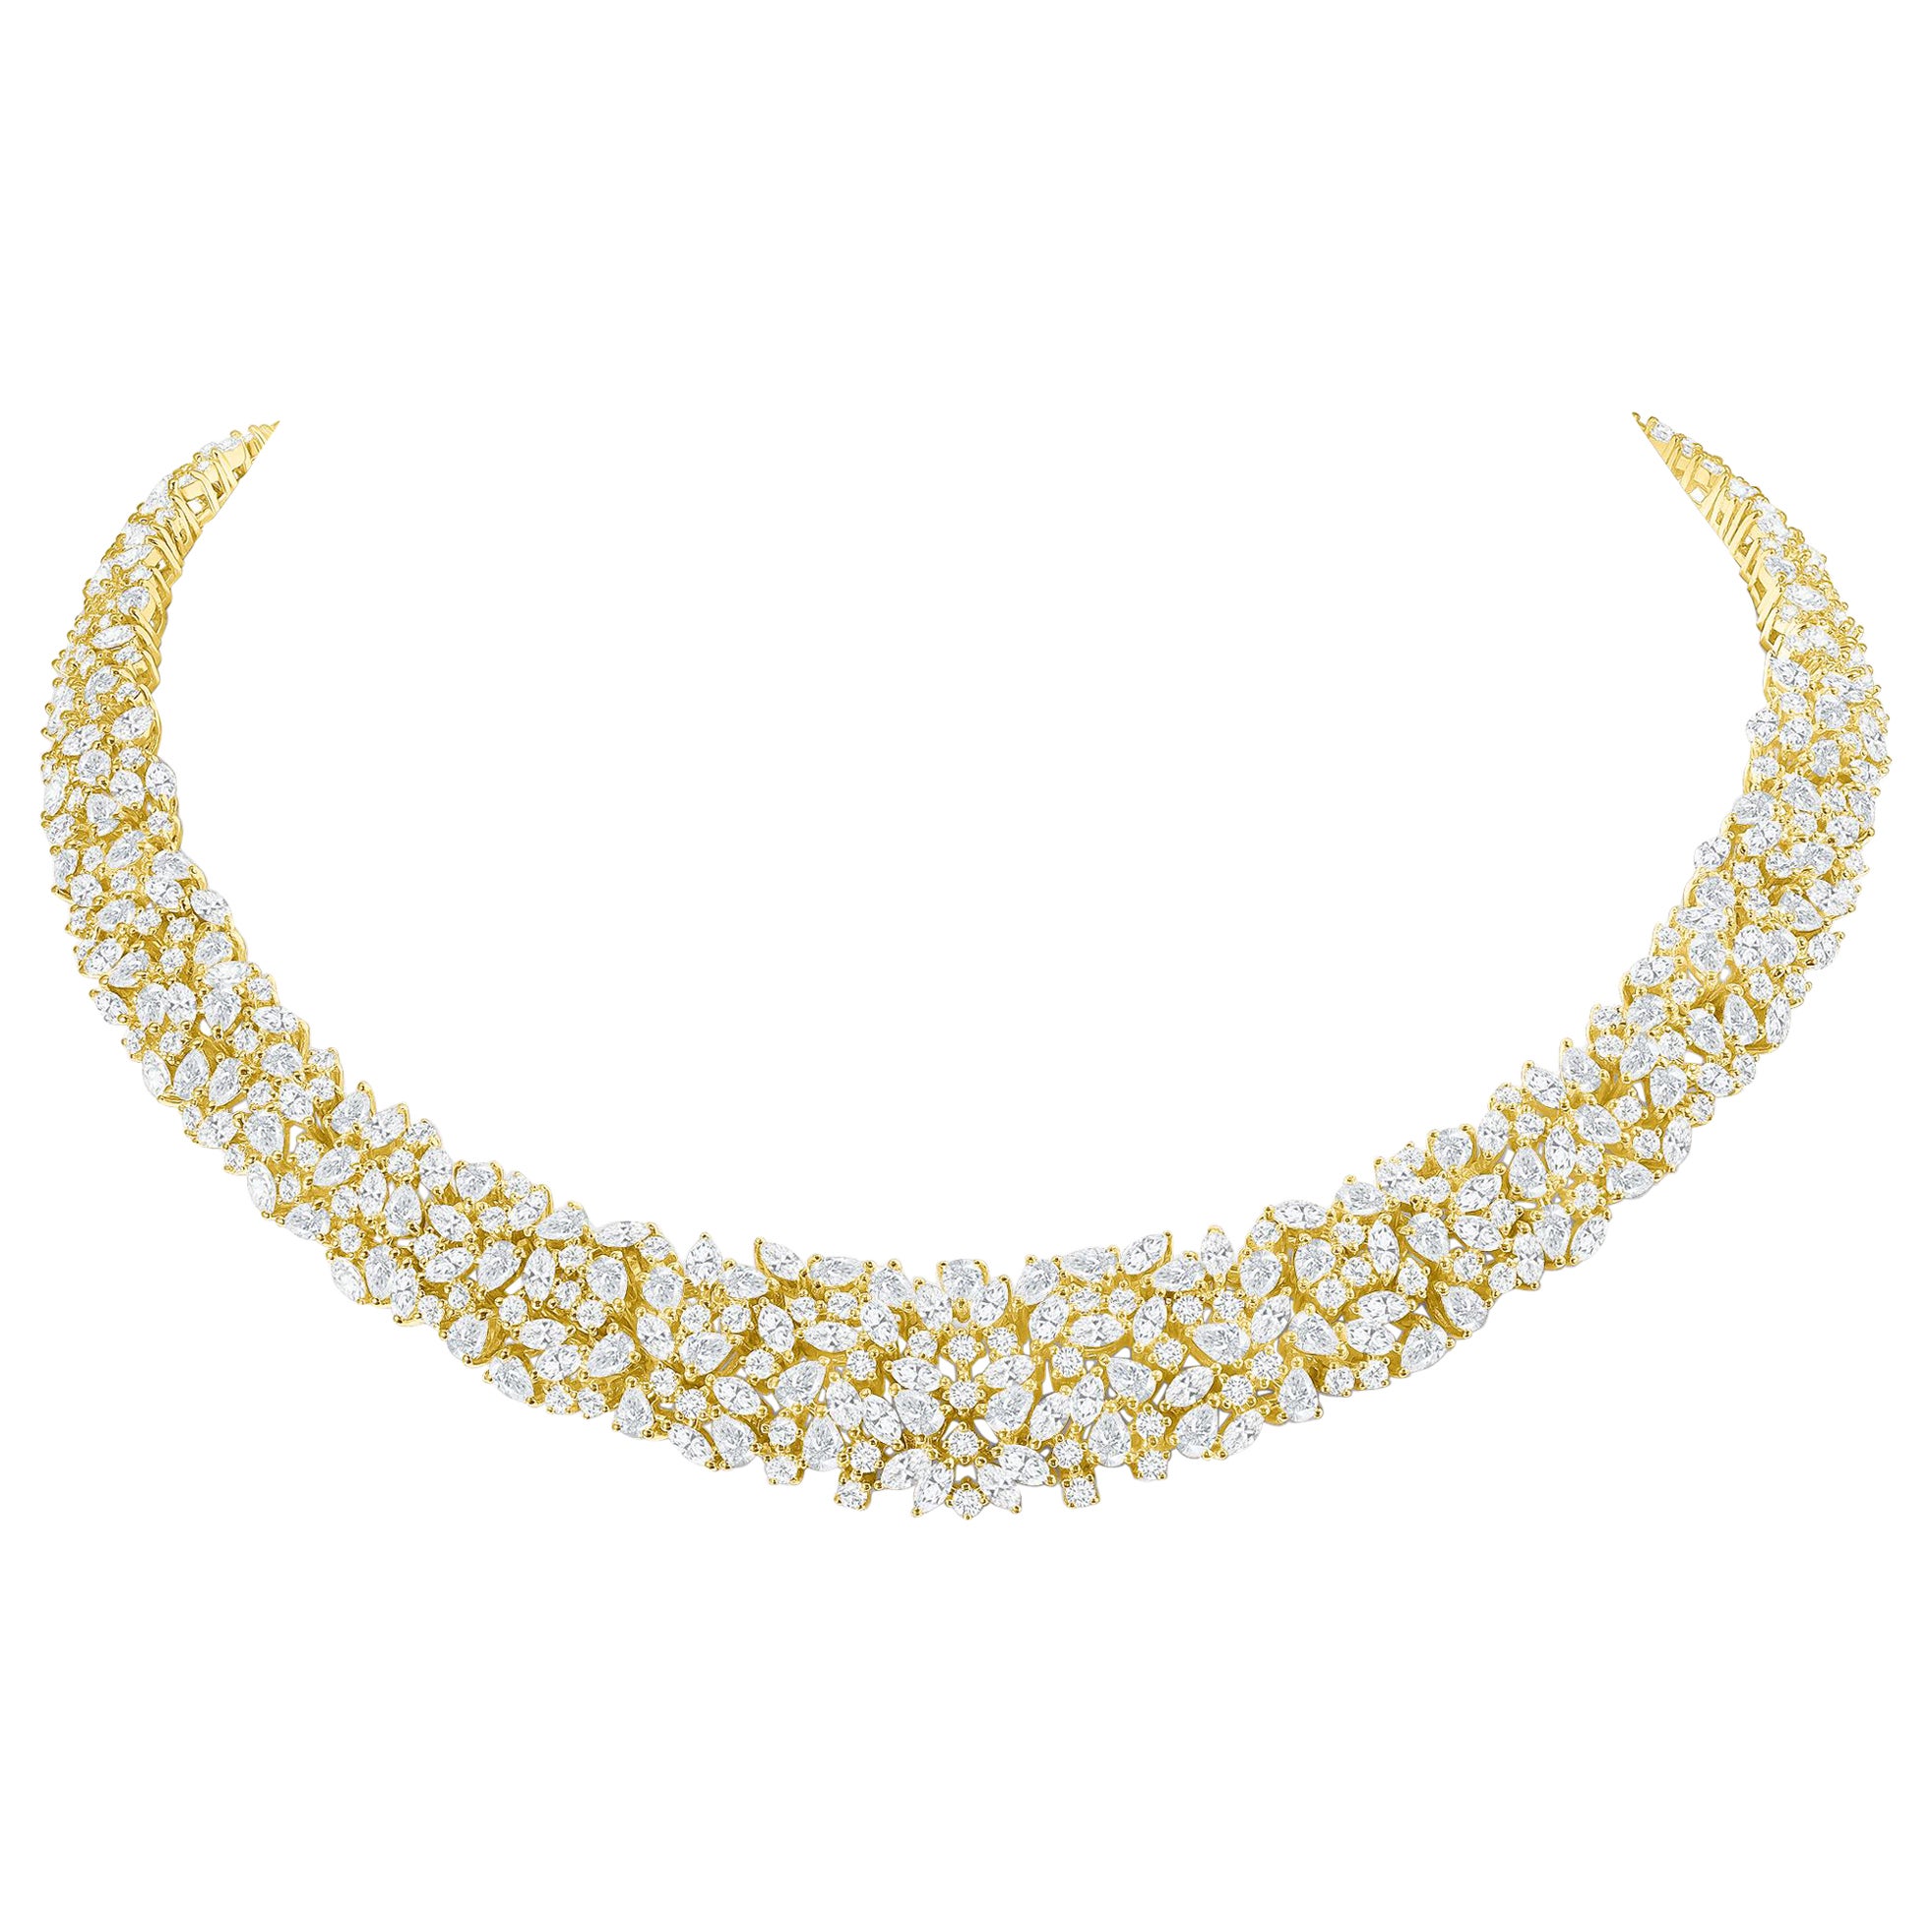 30 Carat Diamond Cluster Necklace, 18K Yellow Gold For Sale